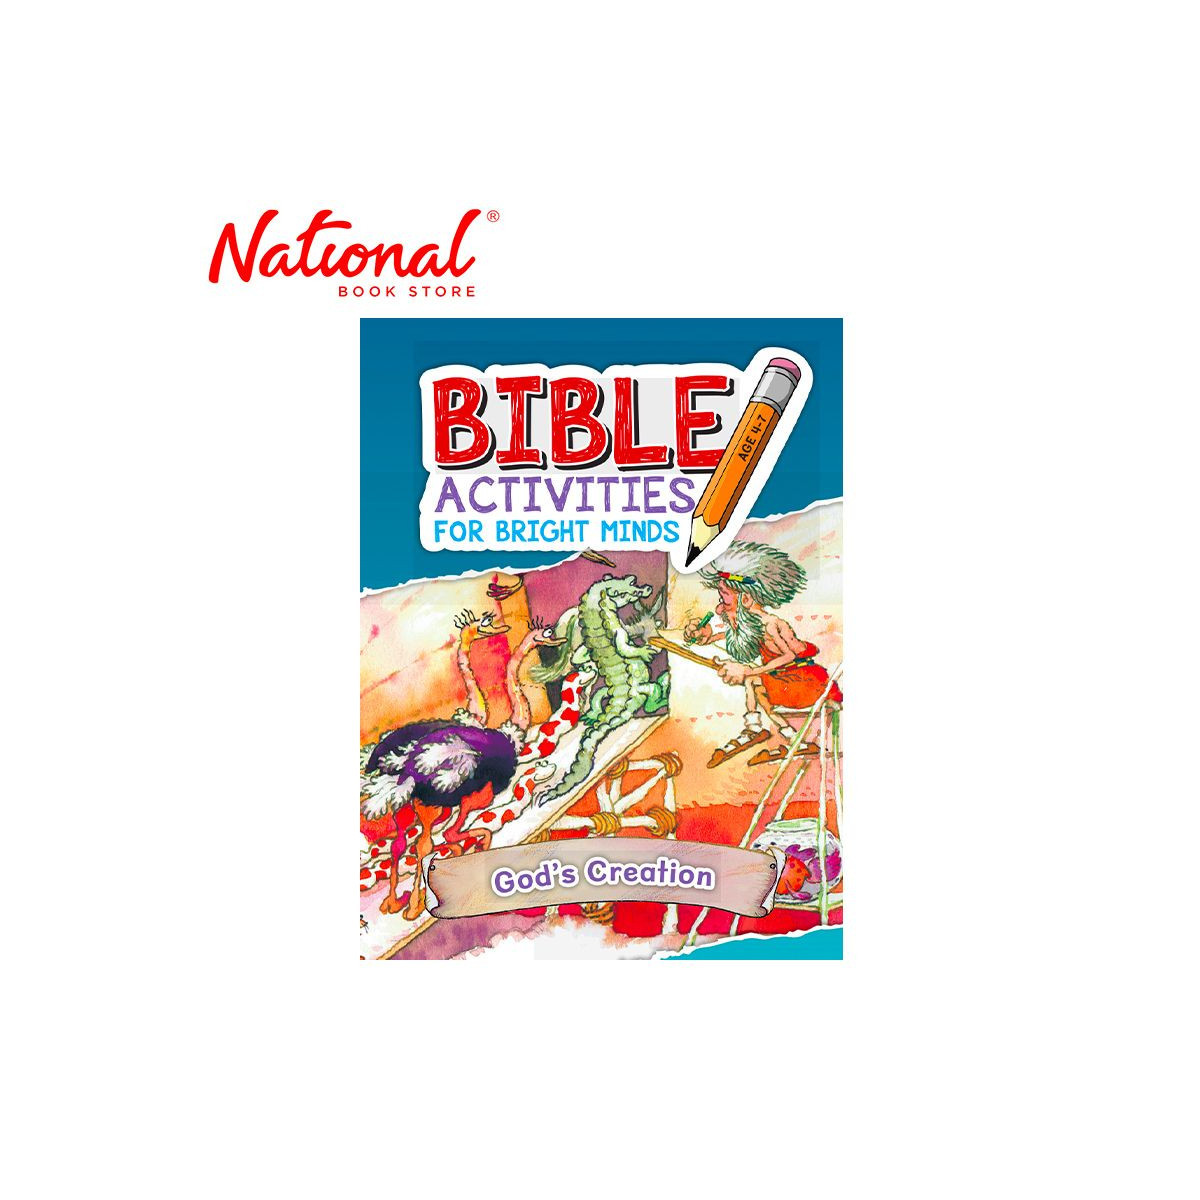 Bible Activities For Bright Minds: God's Creation - Trade Paperback - Books for Kids - Bible Study